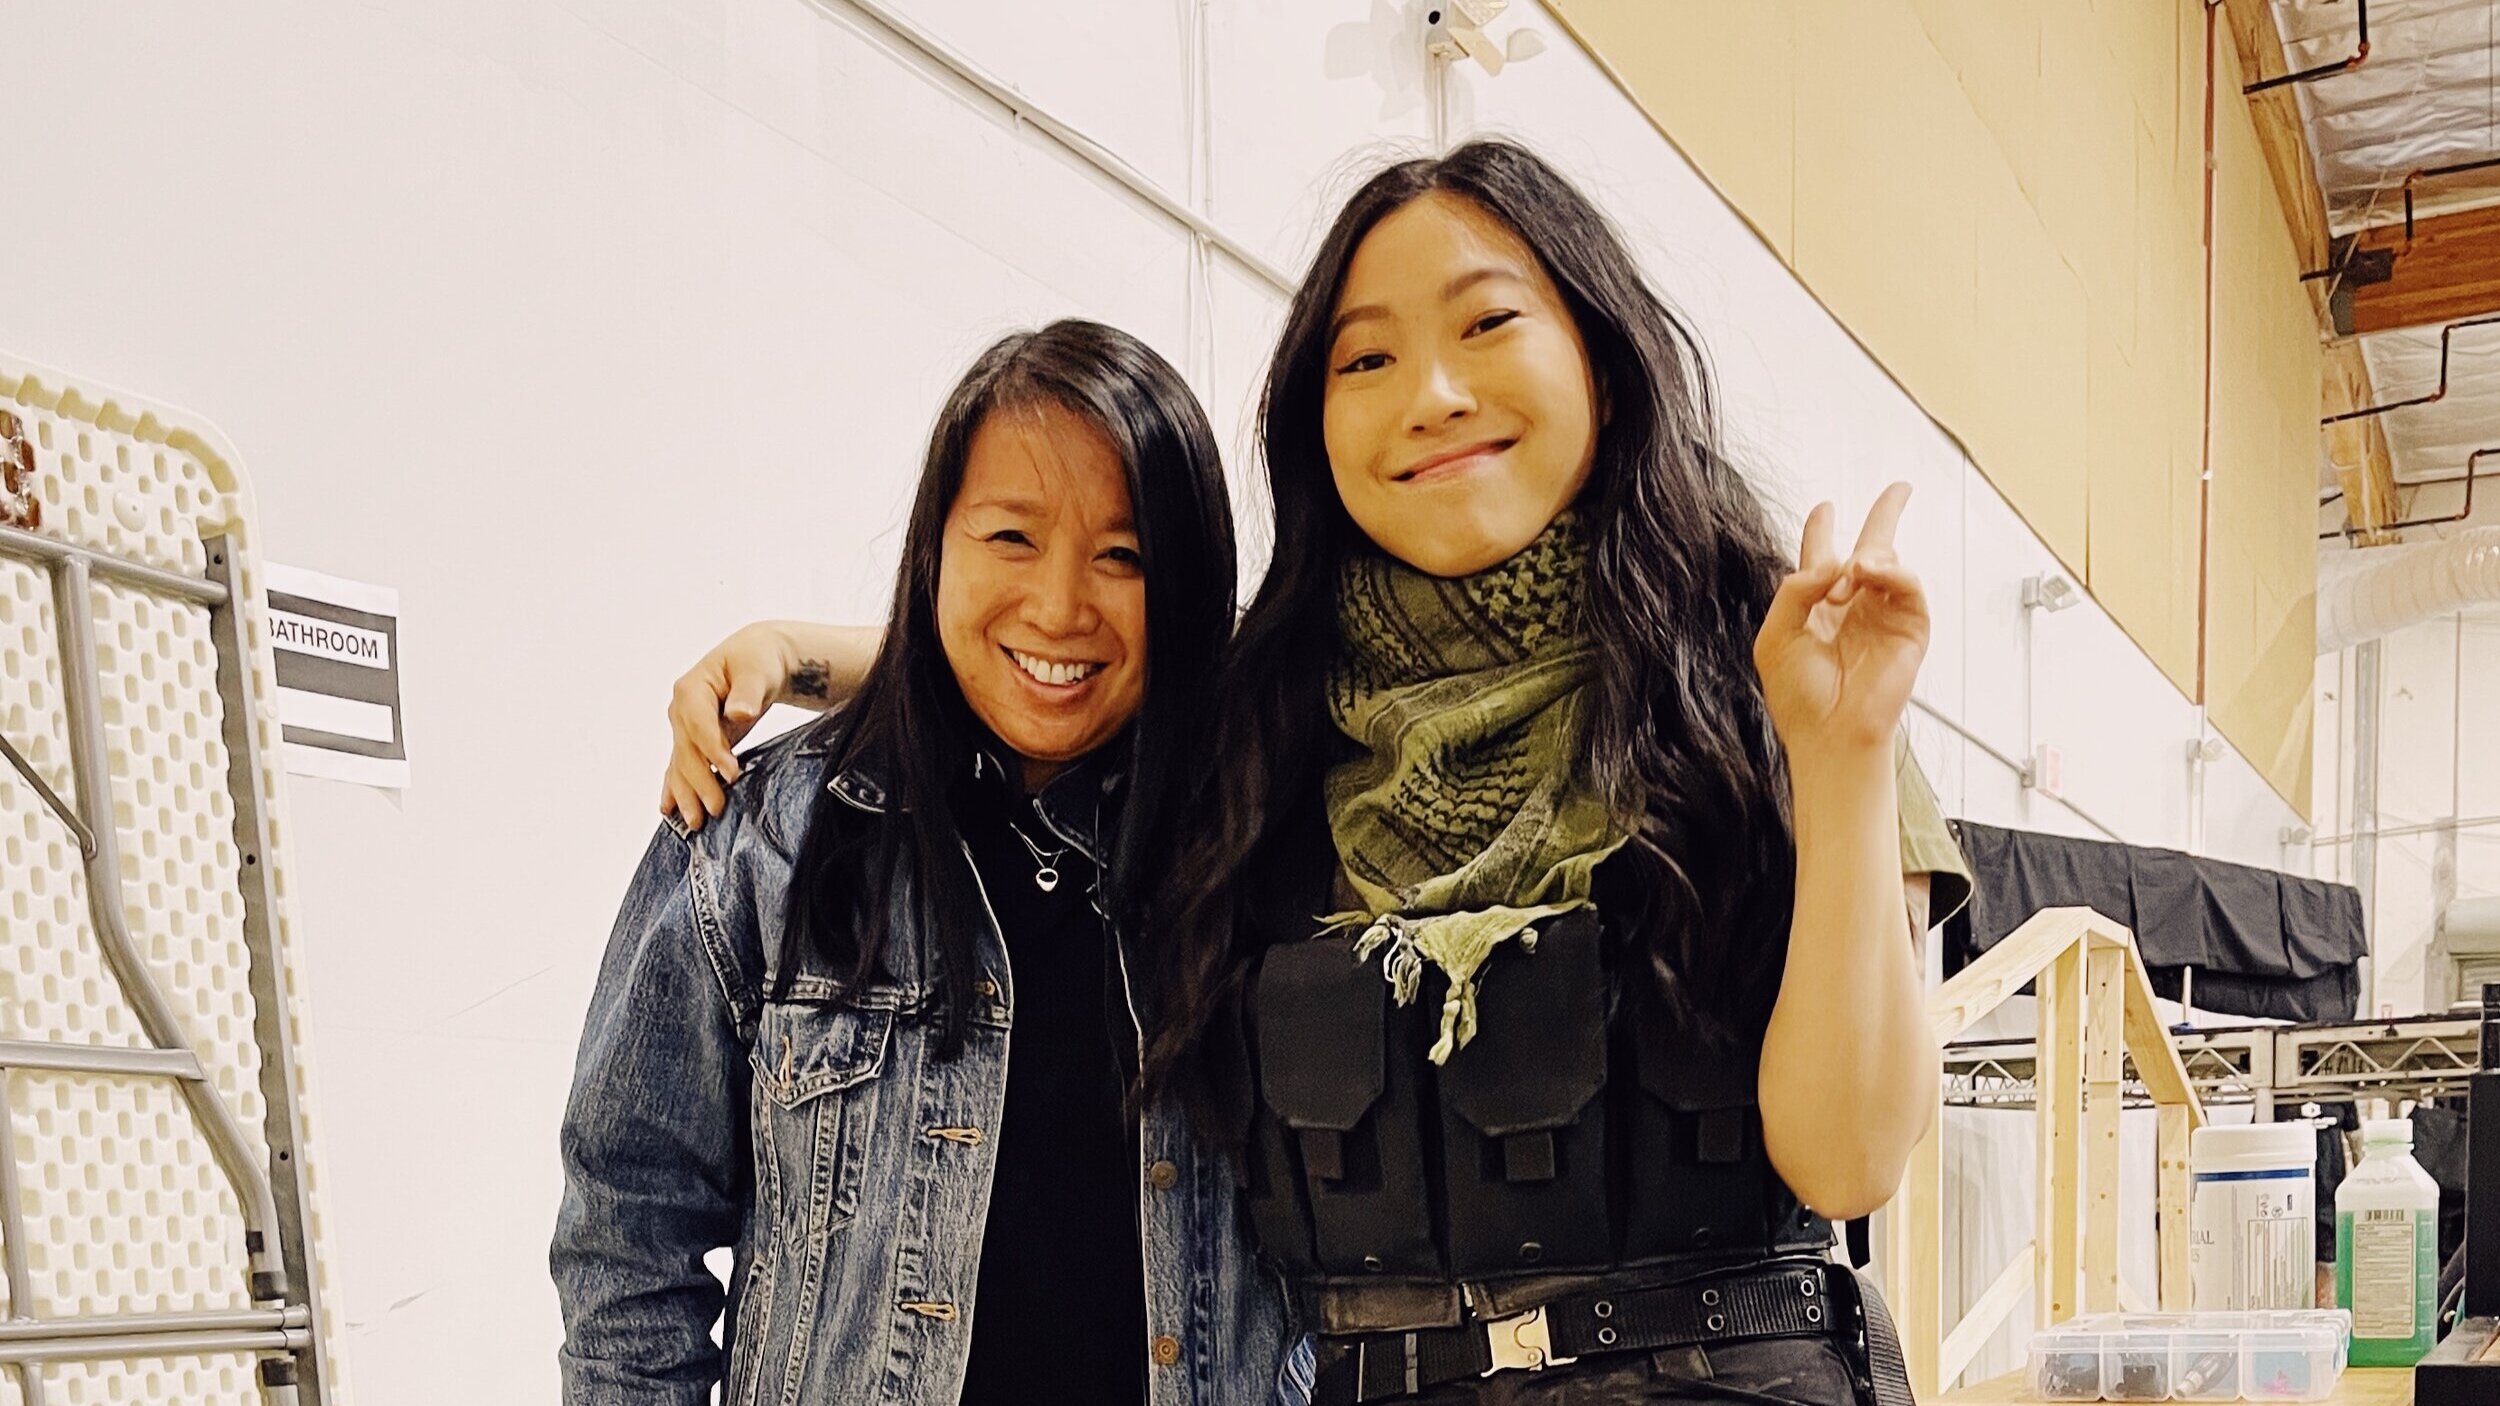 Awkwafina on the set of "Discord the movie"